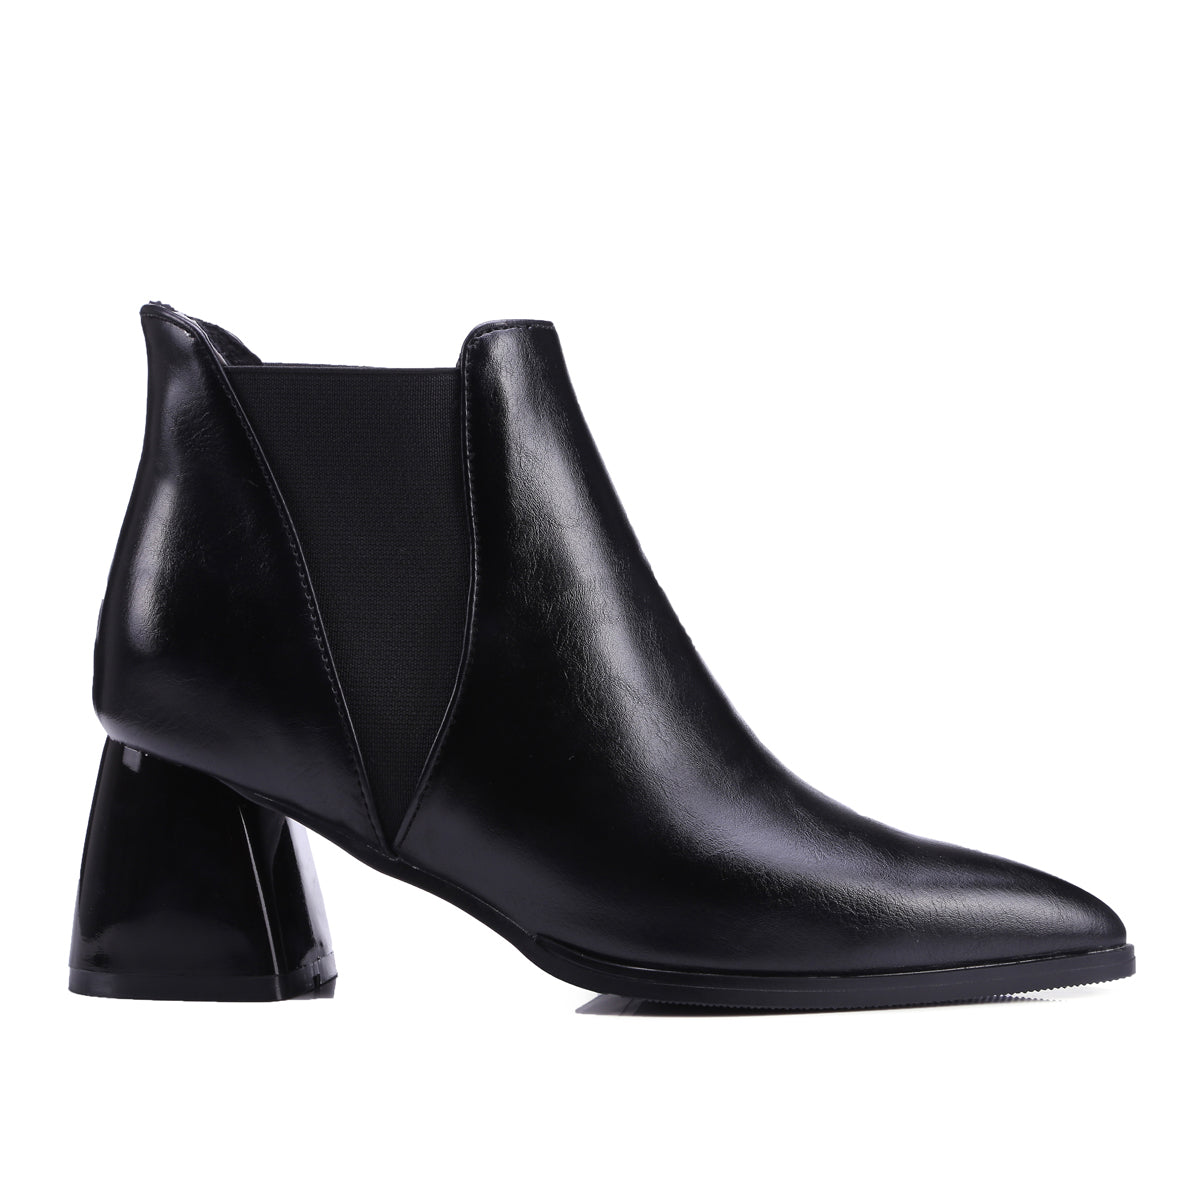 Bigsizeheels Mio magazine slip-on ankle boots with pointed toes - Black freeshipping - bigsizeheel®-size5-size15 -All Plus Sizes Available!